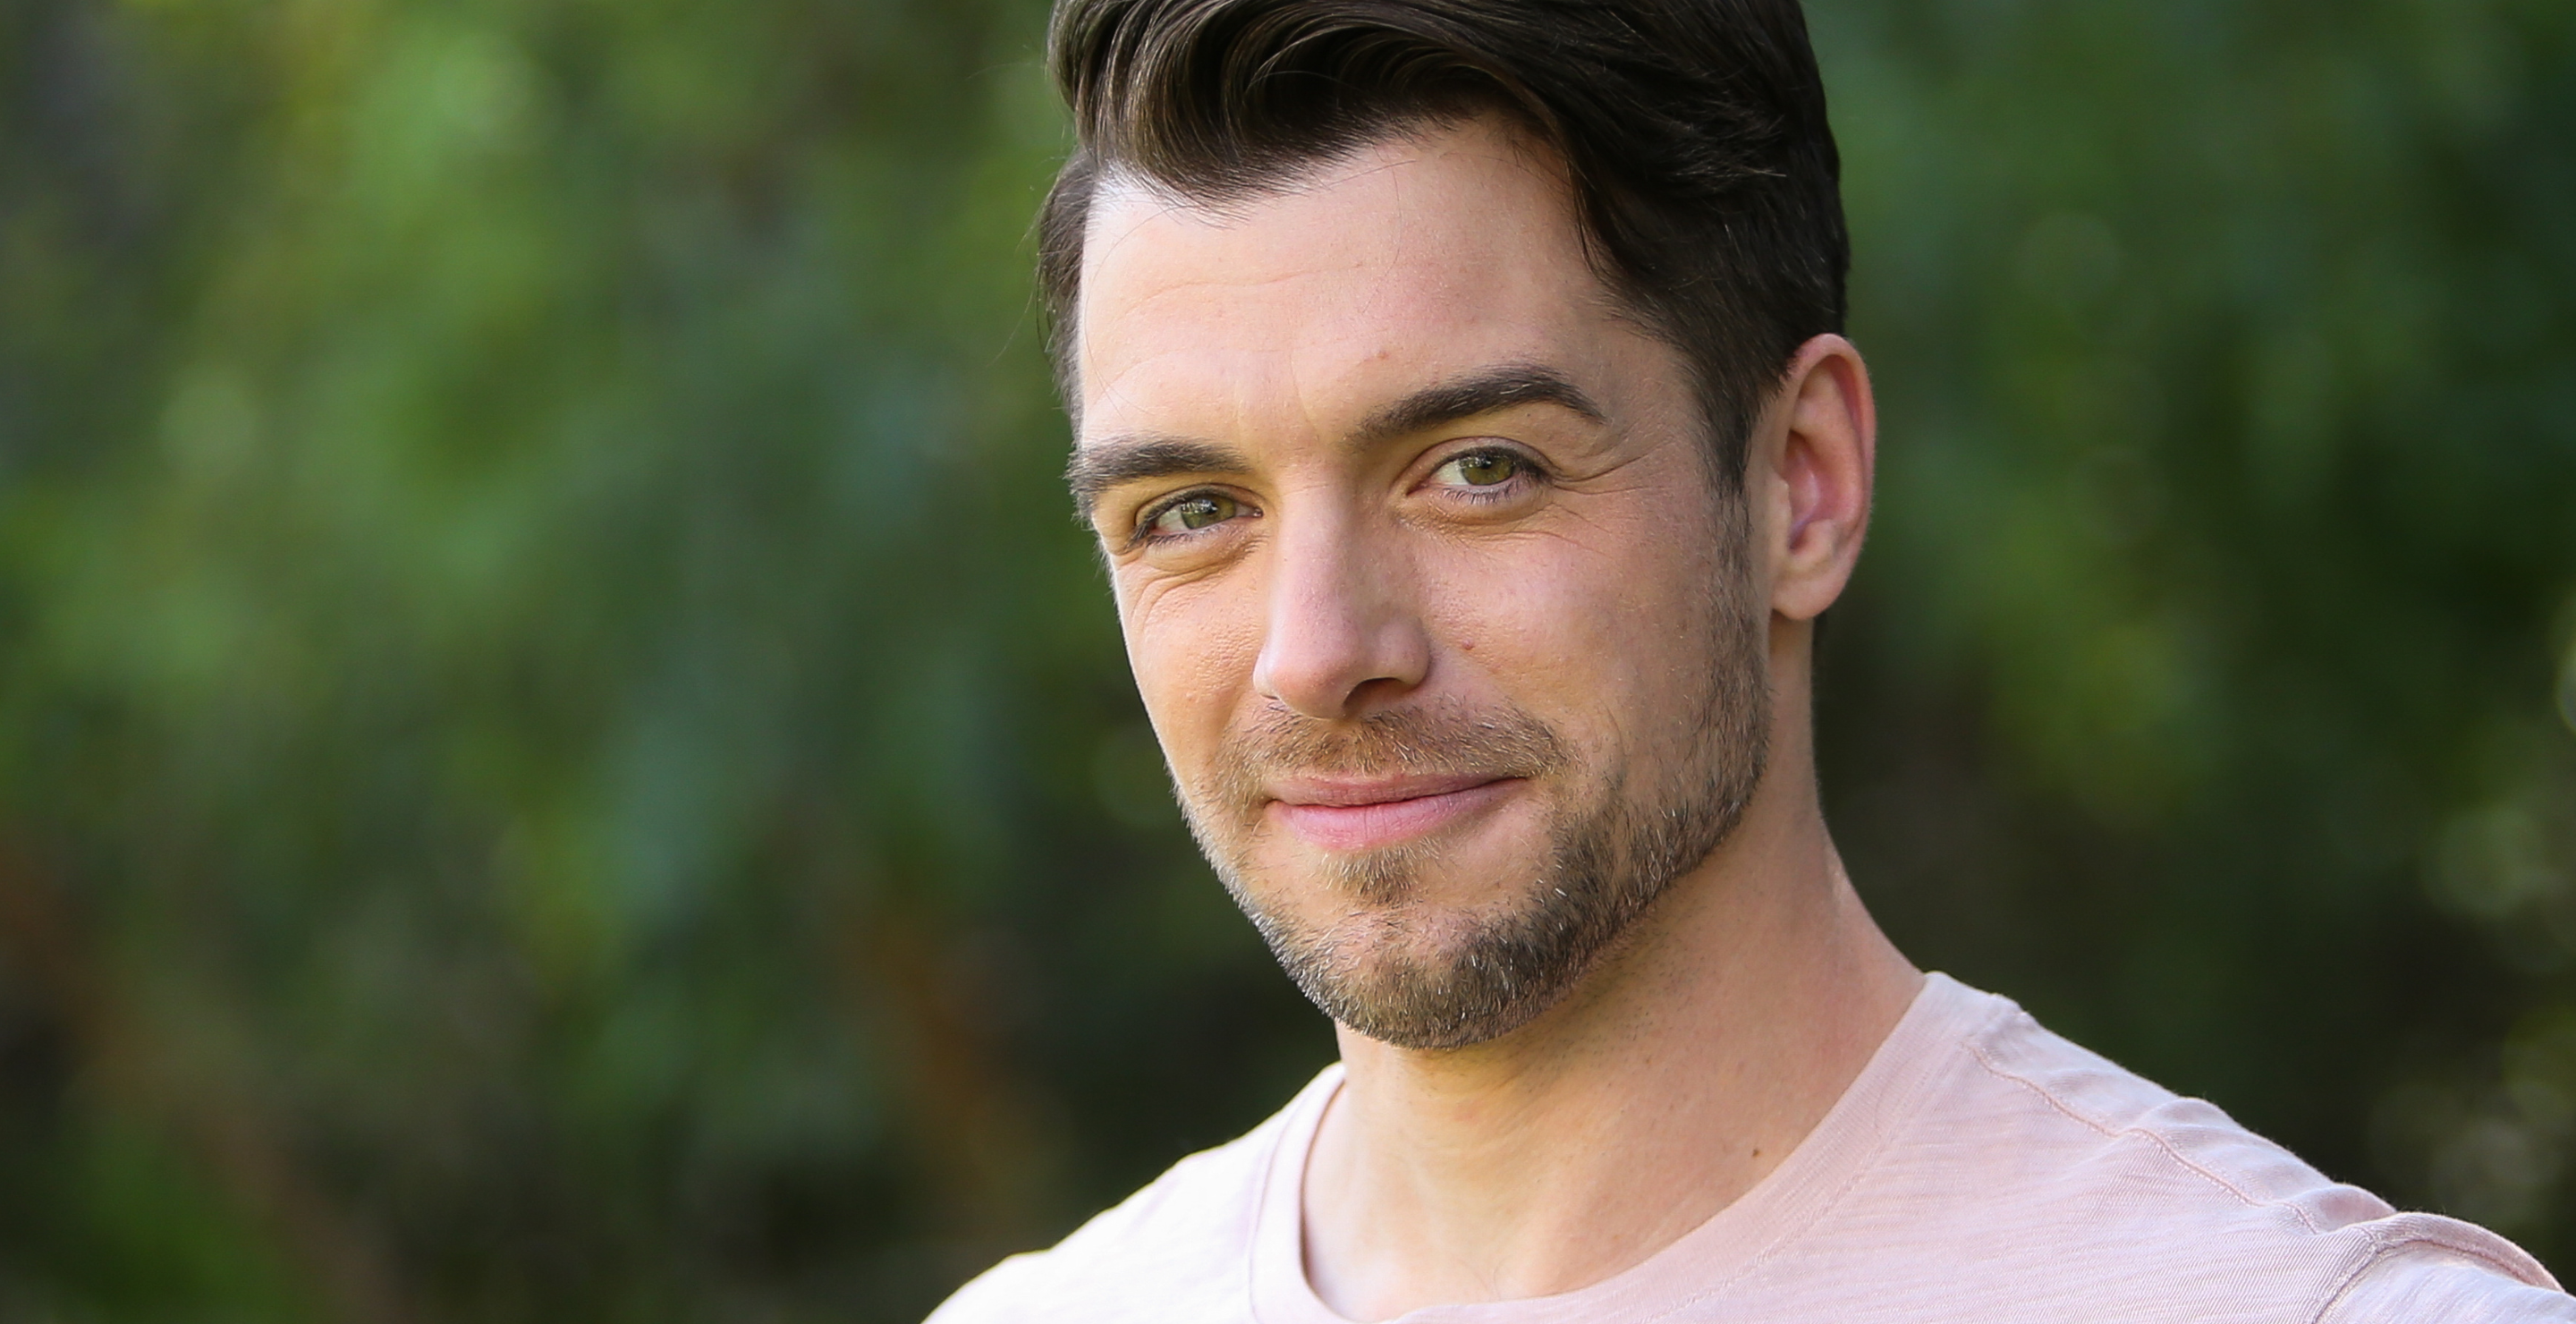 Actor Dan Jeannotte visits Hallmark's "Home & Family" at Universal Studios Hollywood on April 24, 2019 in Universal City, California.